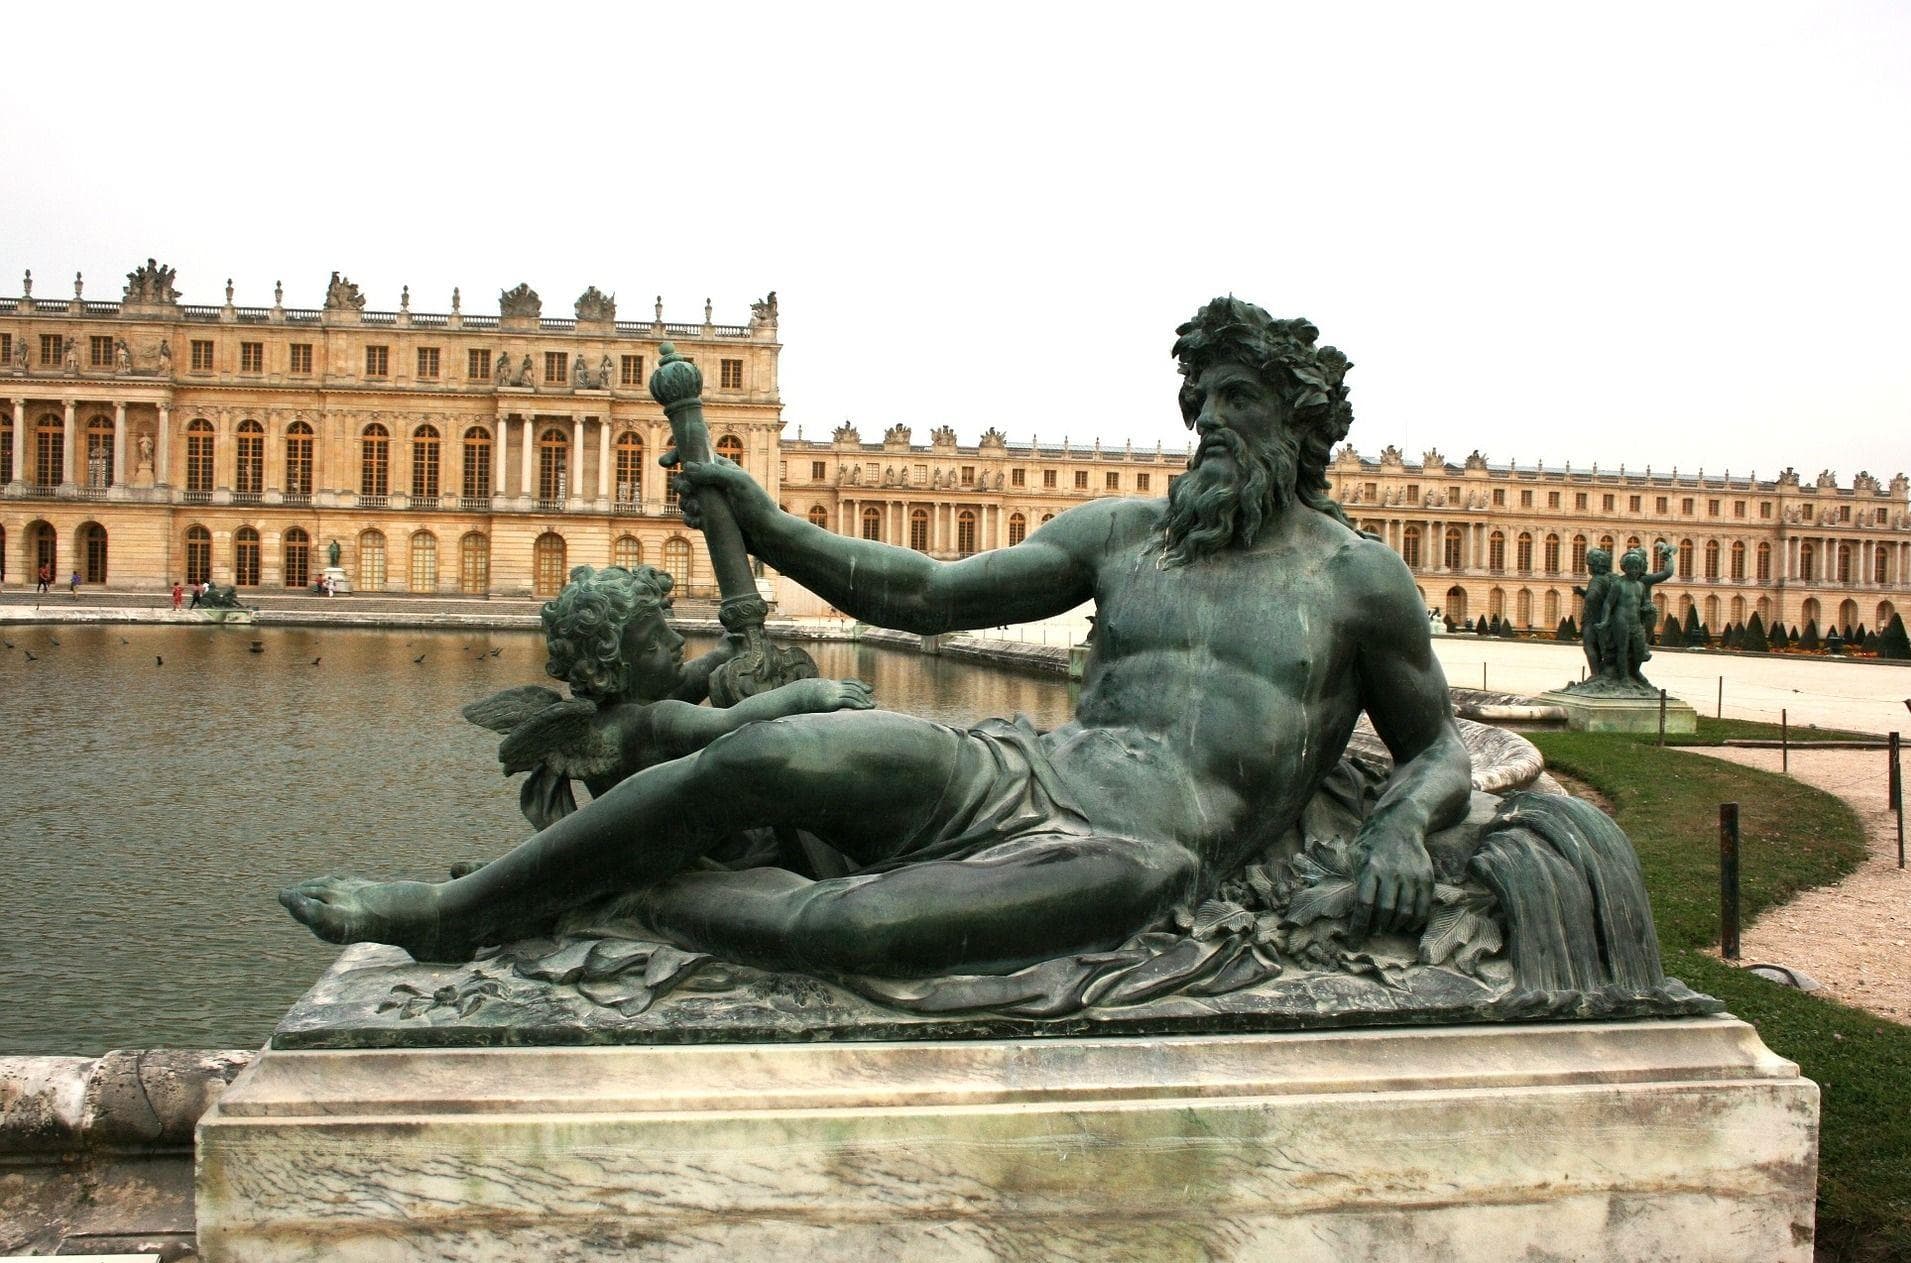 Random Absolutely Insane Facts About The Palace of Versailles